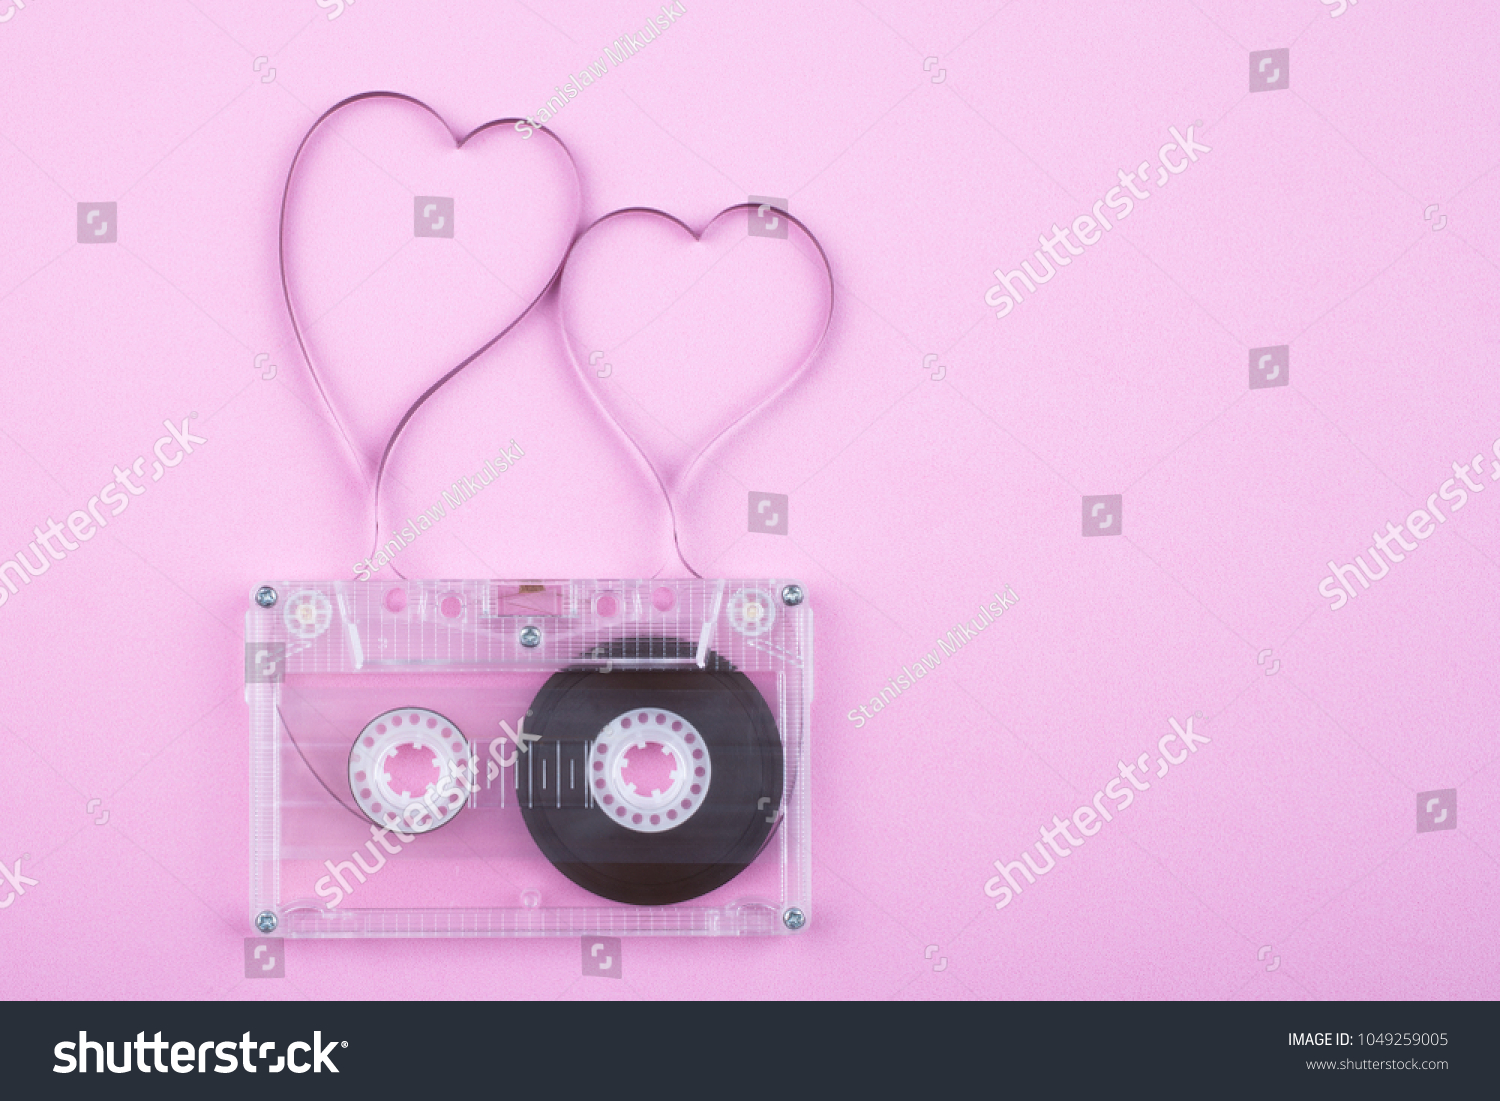 Film in a shape of heart from Compact Cassette. Love for music and songs. Pink background. #1049259005